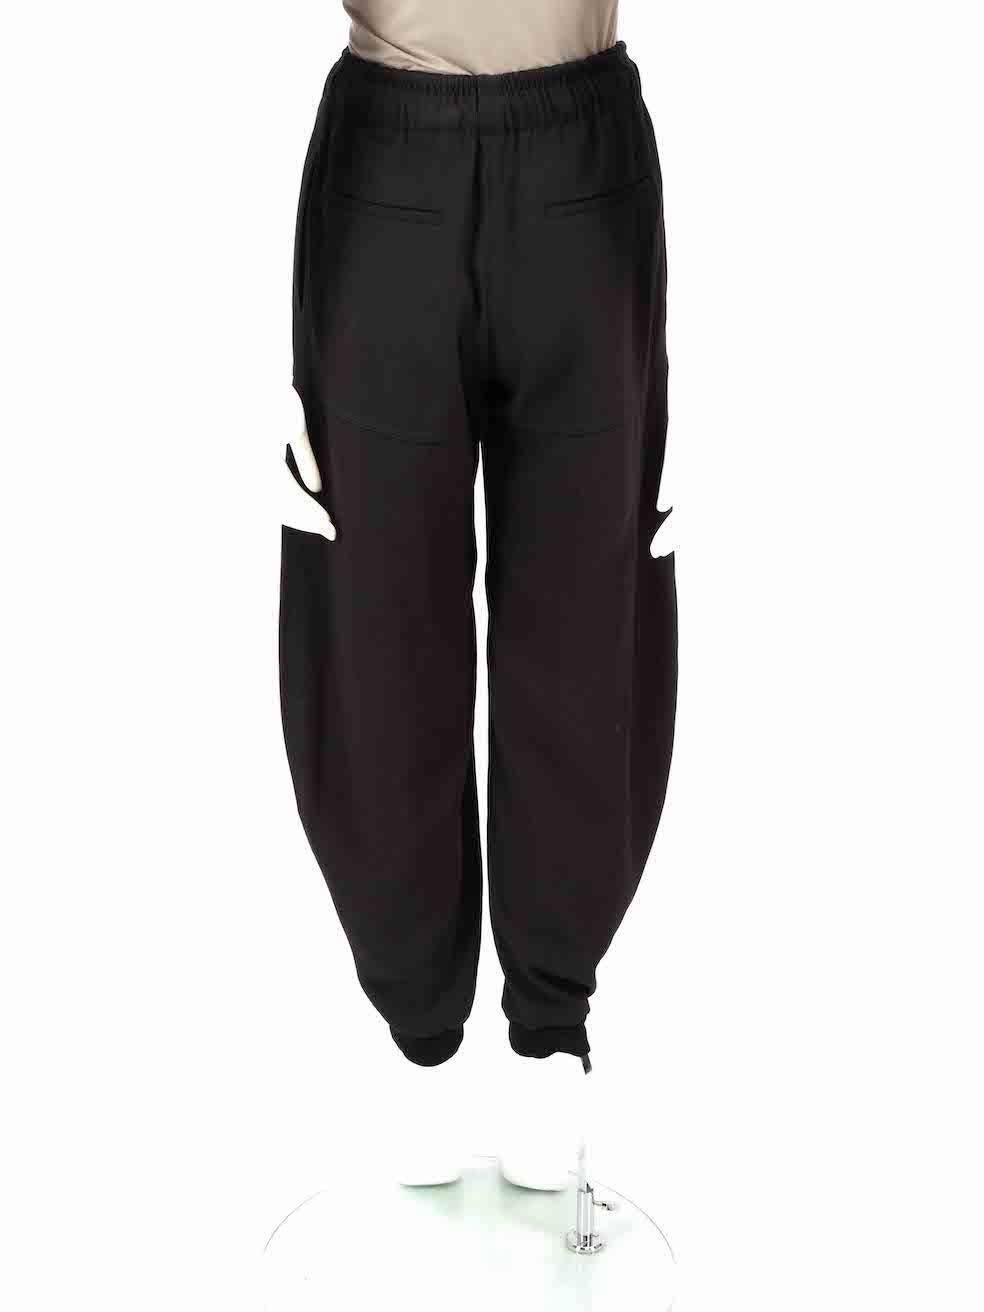 Chloé Black Elasticated Sweatpants Size XS In Good Condition For Sale In London, GB